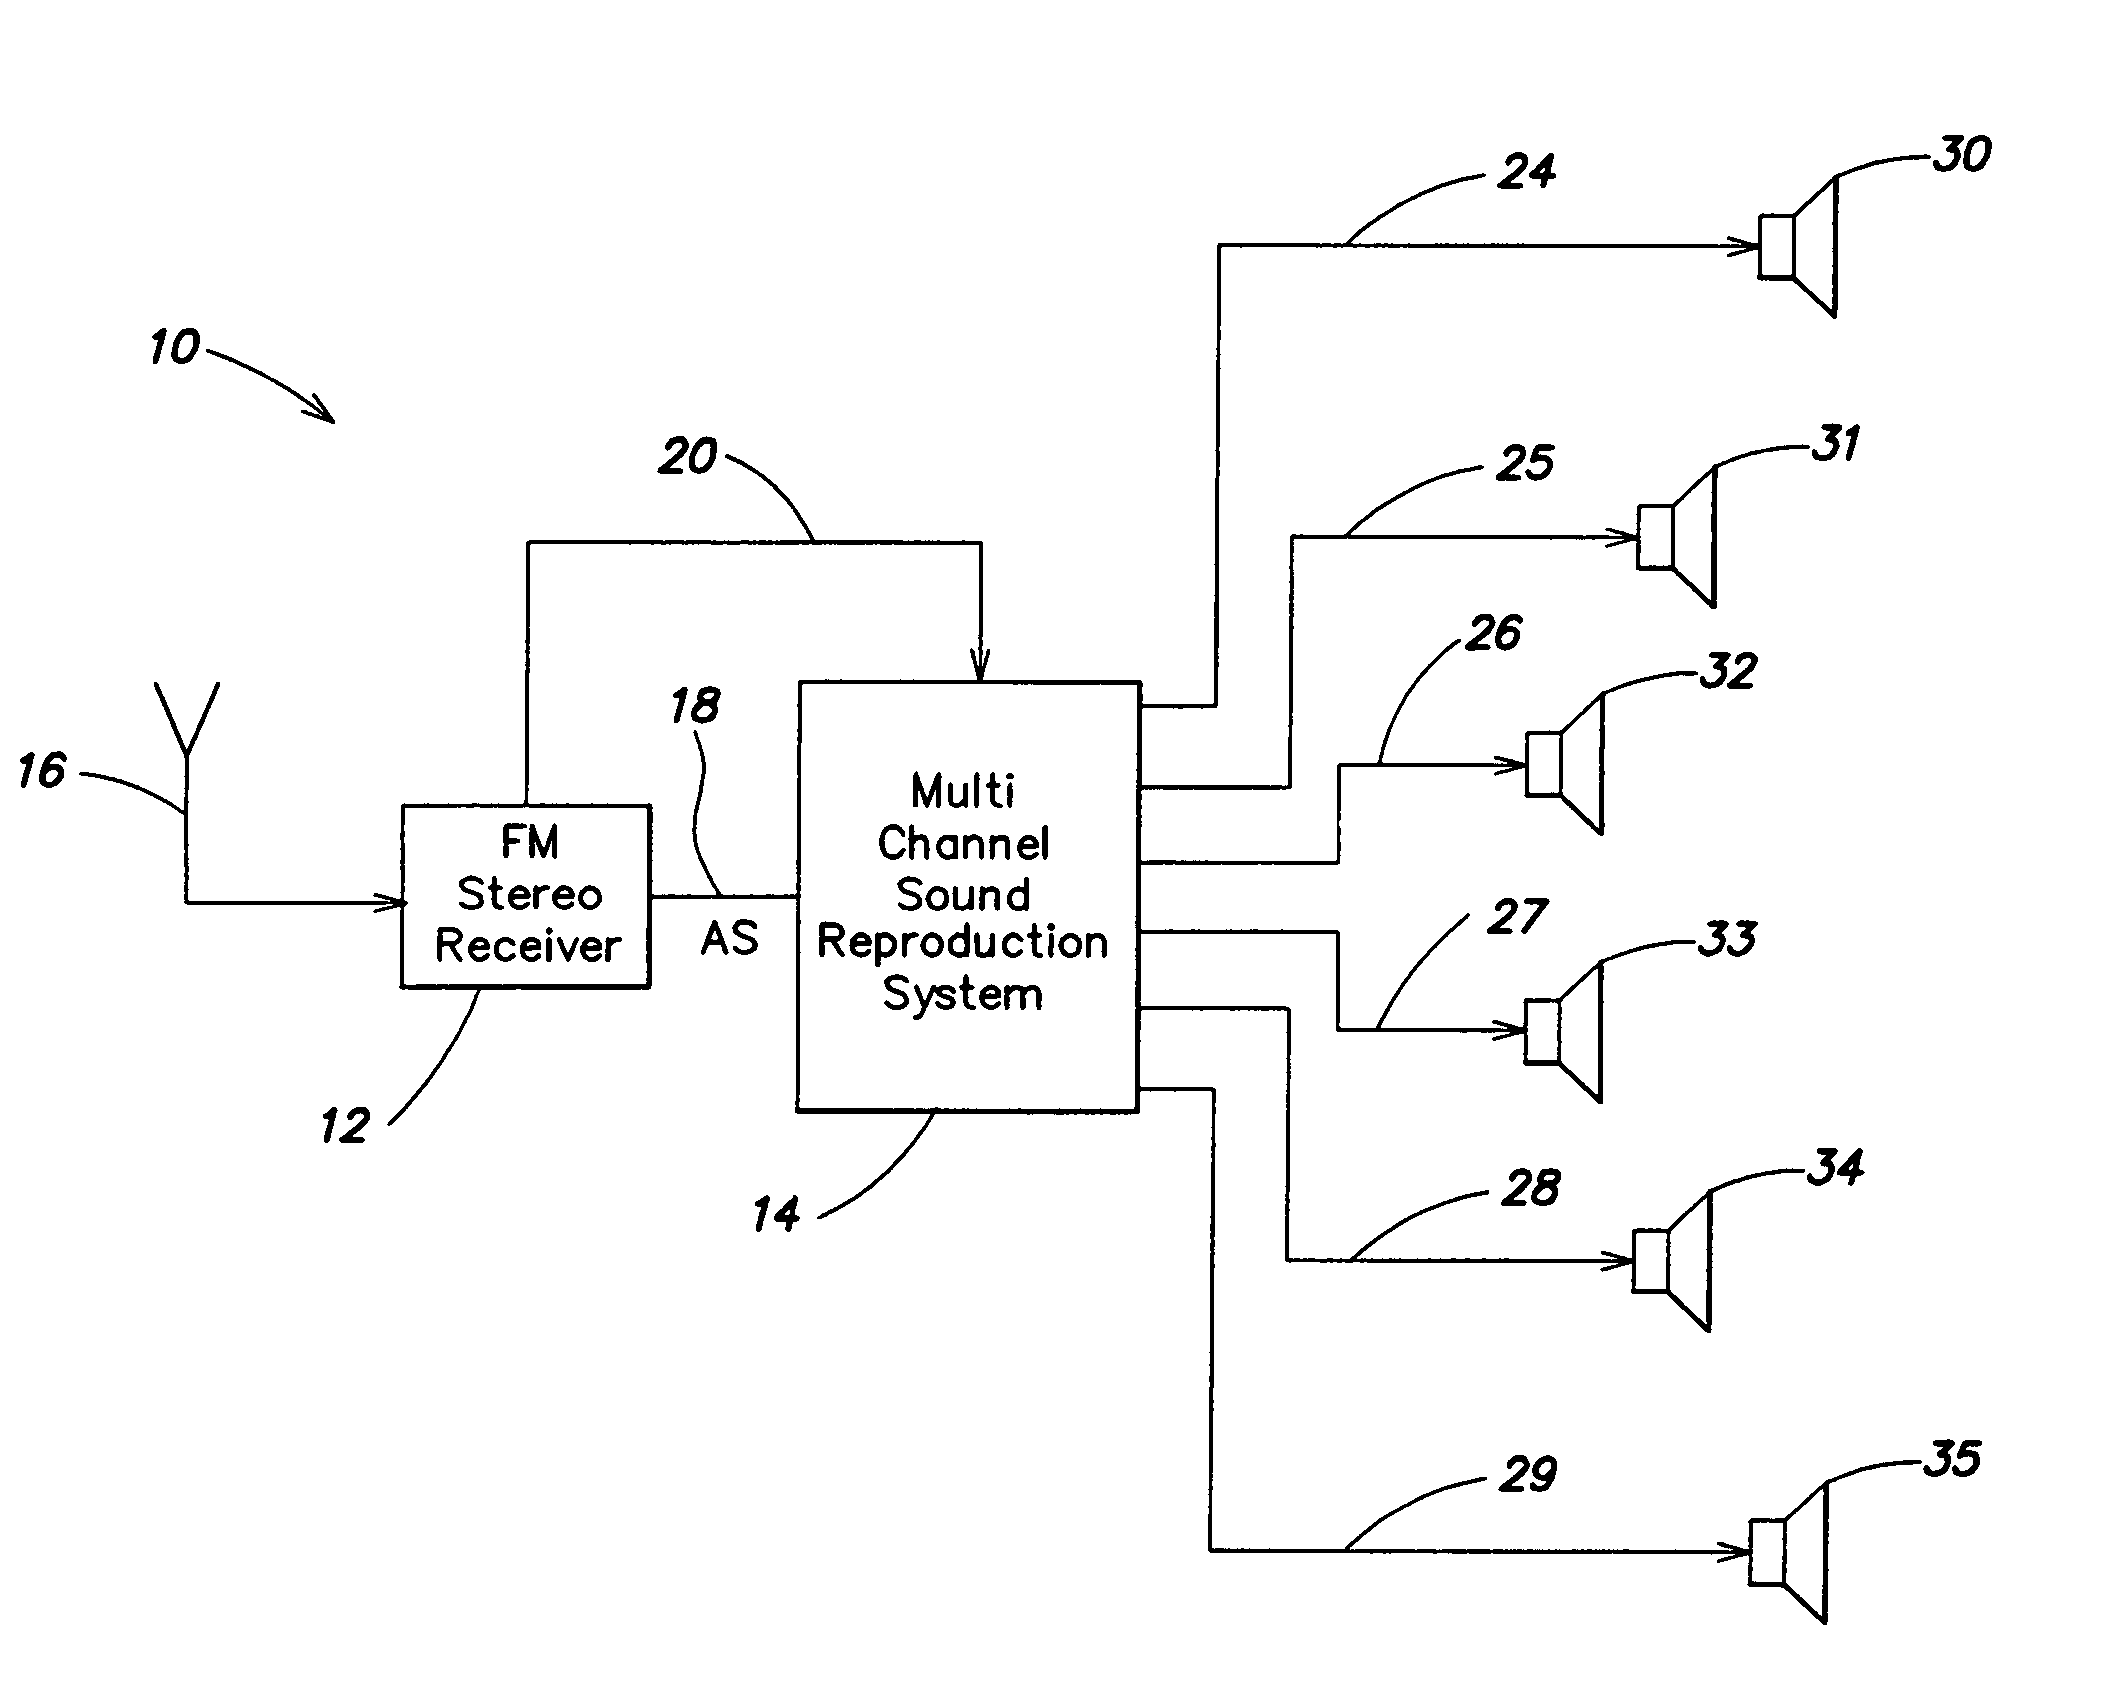 Apparatus for multichannel sound reproduction system